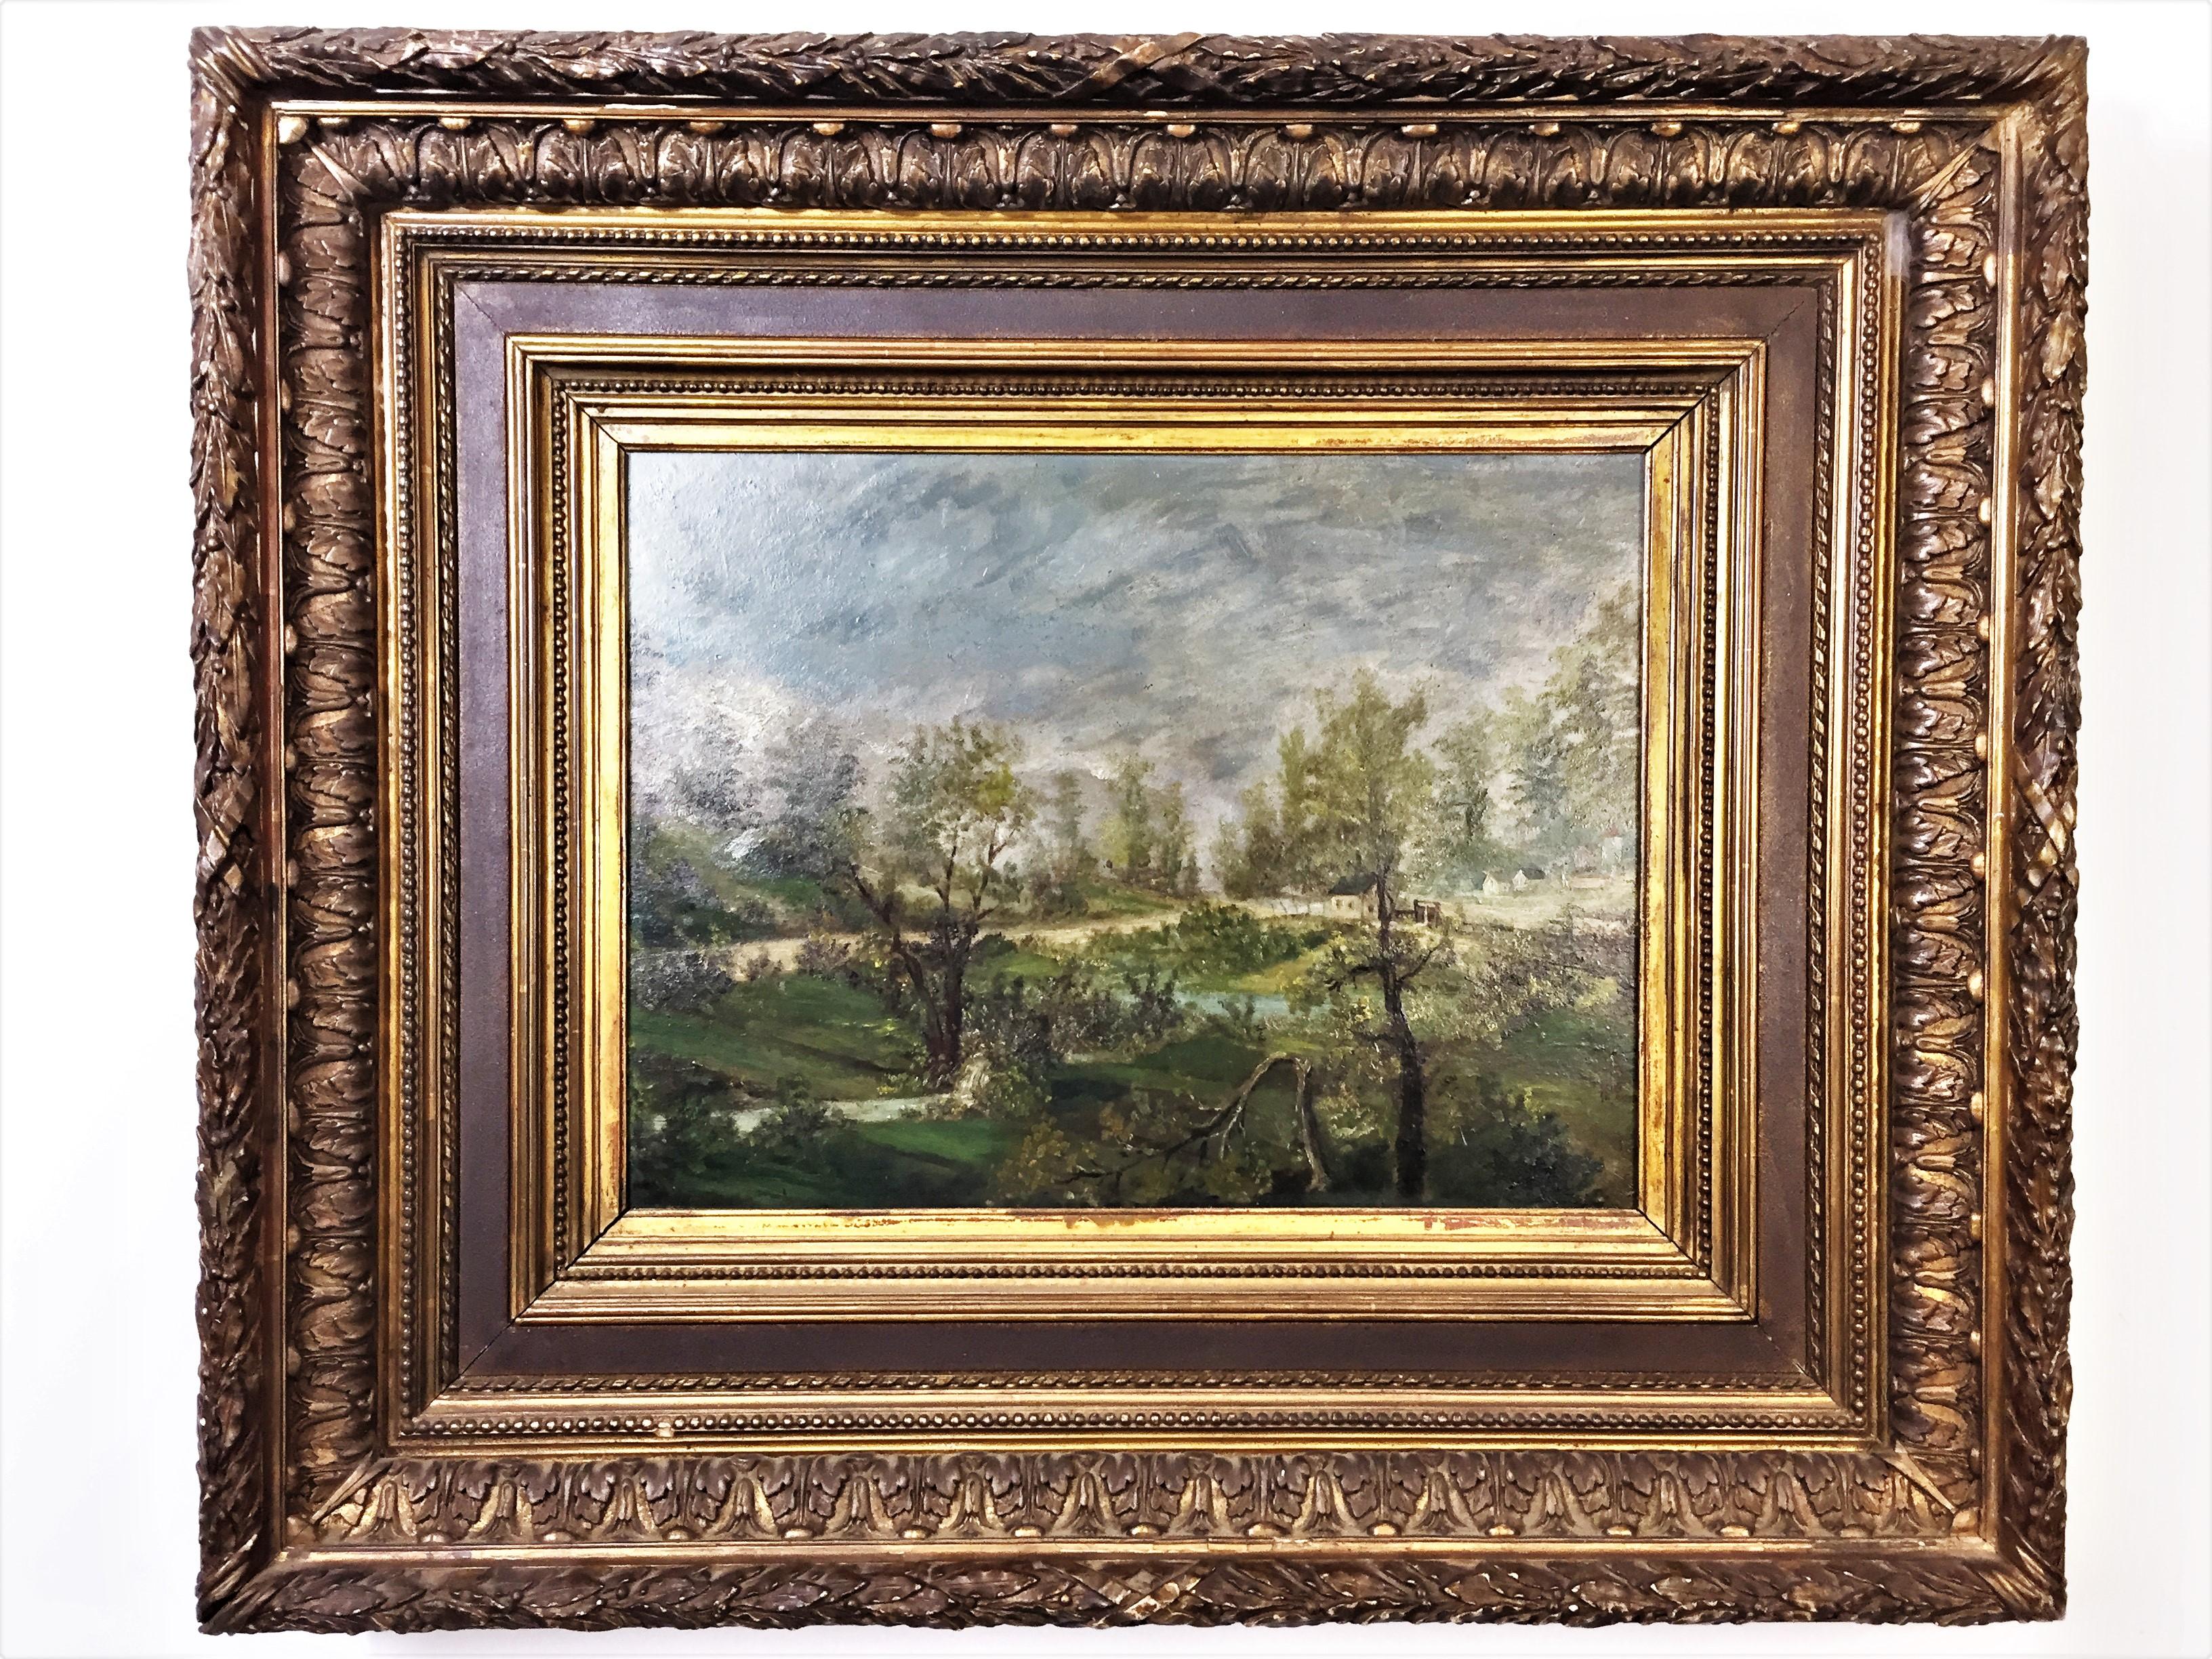 Charming oil on panel representing a landscape with a river and a village in the background. 
Impressionism painting with an important guilded frame with a decor of pearl, ribbons, bay and acanthus leaves.
Dimensions: 16/12 inches at view
